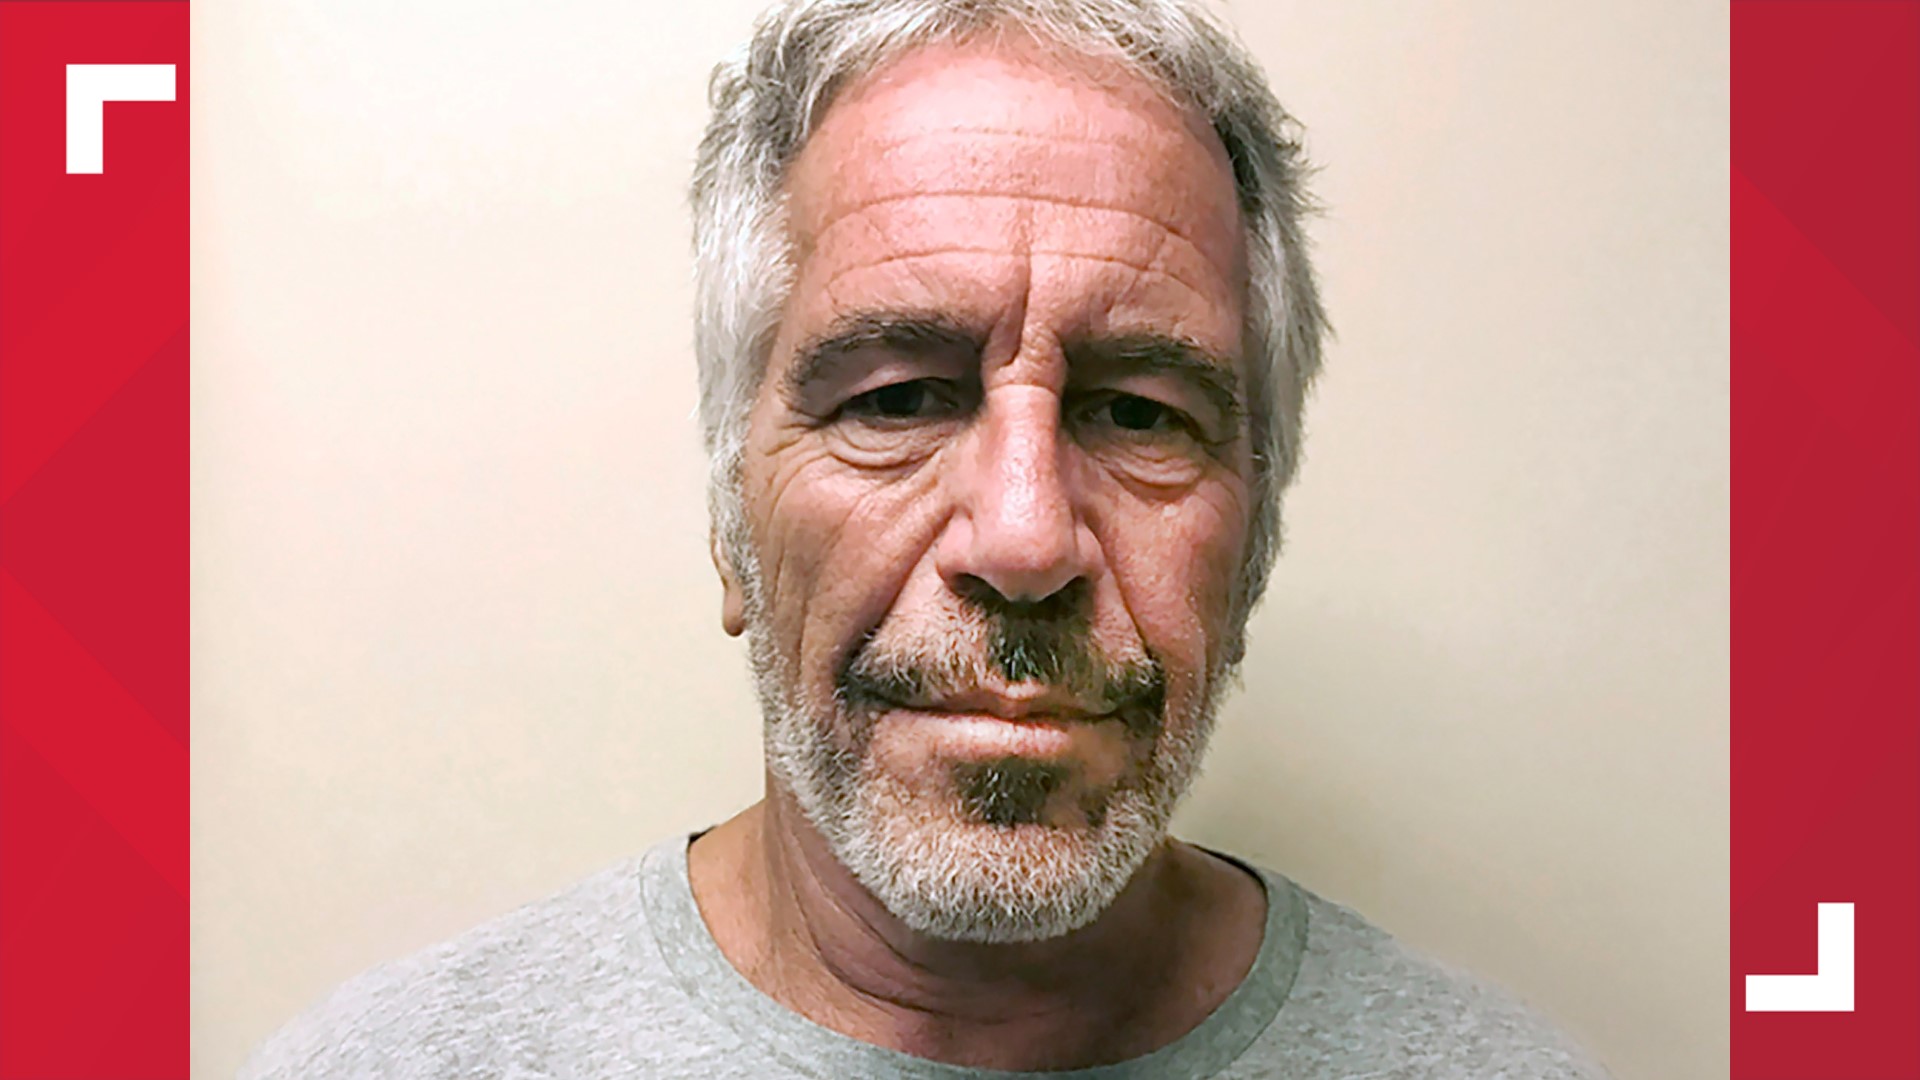 The Justice Department’s watchdog said in a report that negligence and misconduct by jail guards enabled Jeffrey Epstein's suicide while in custody.